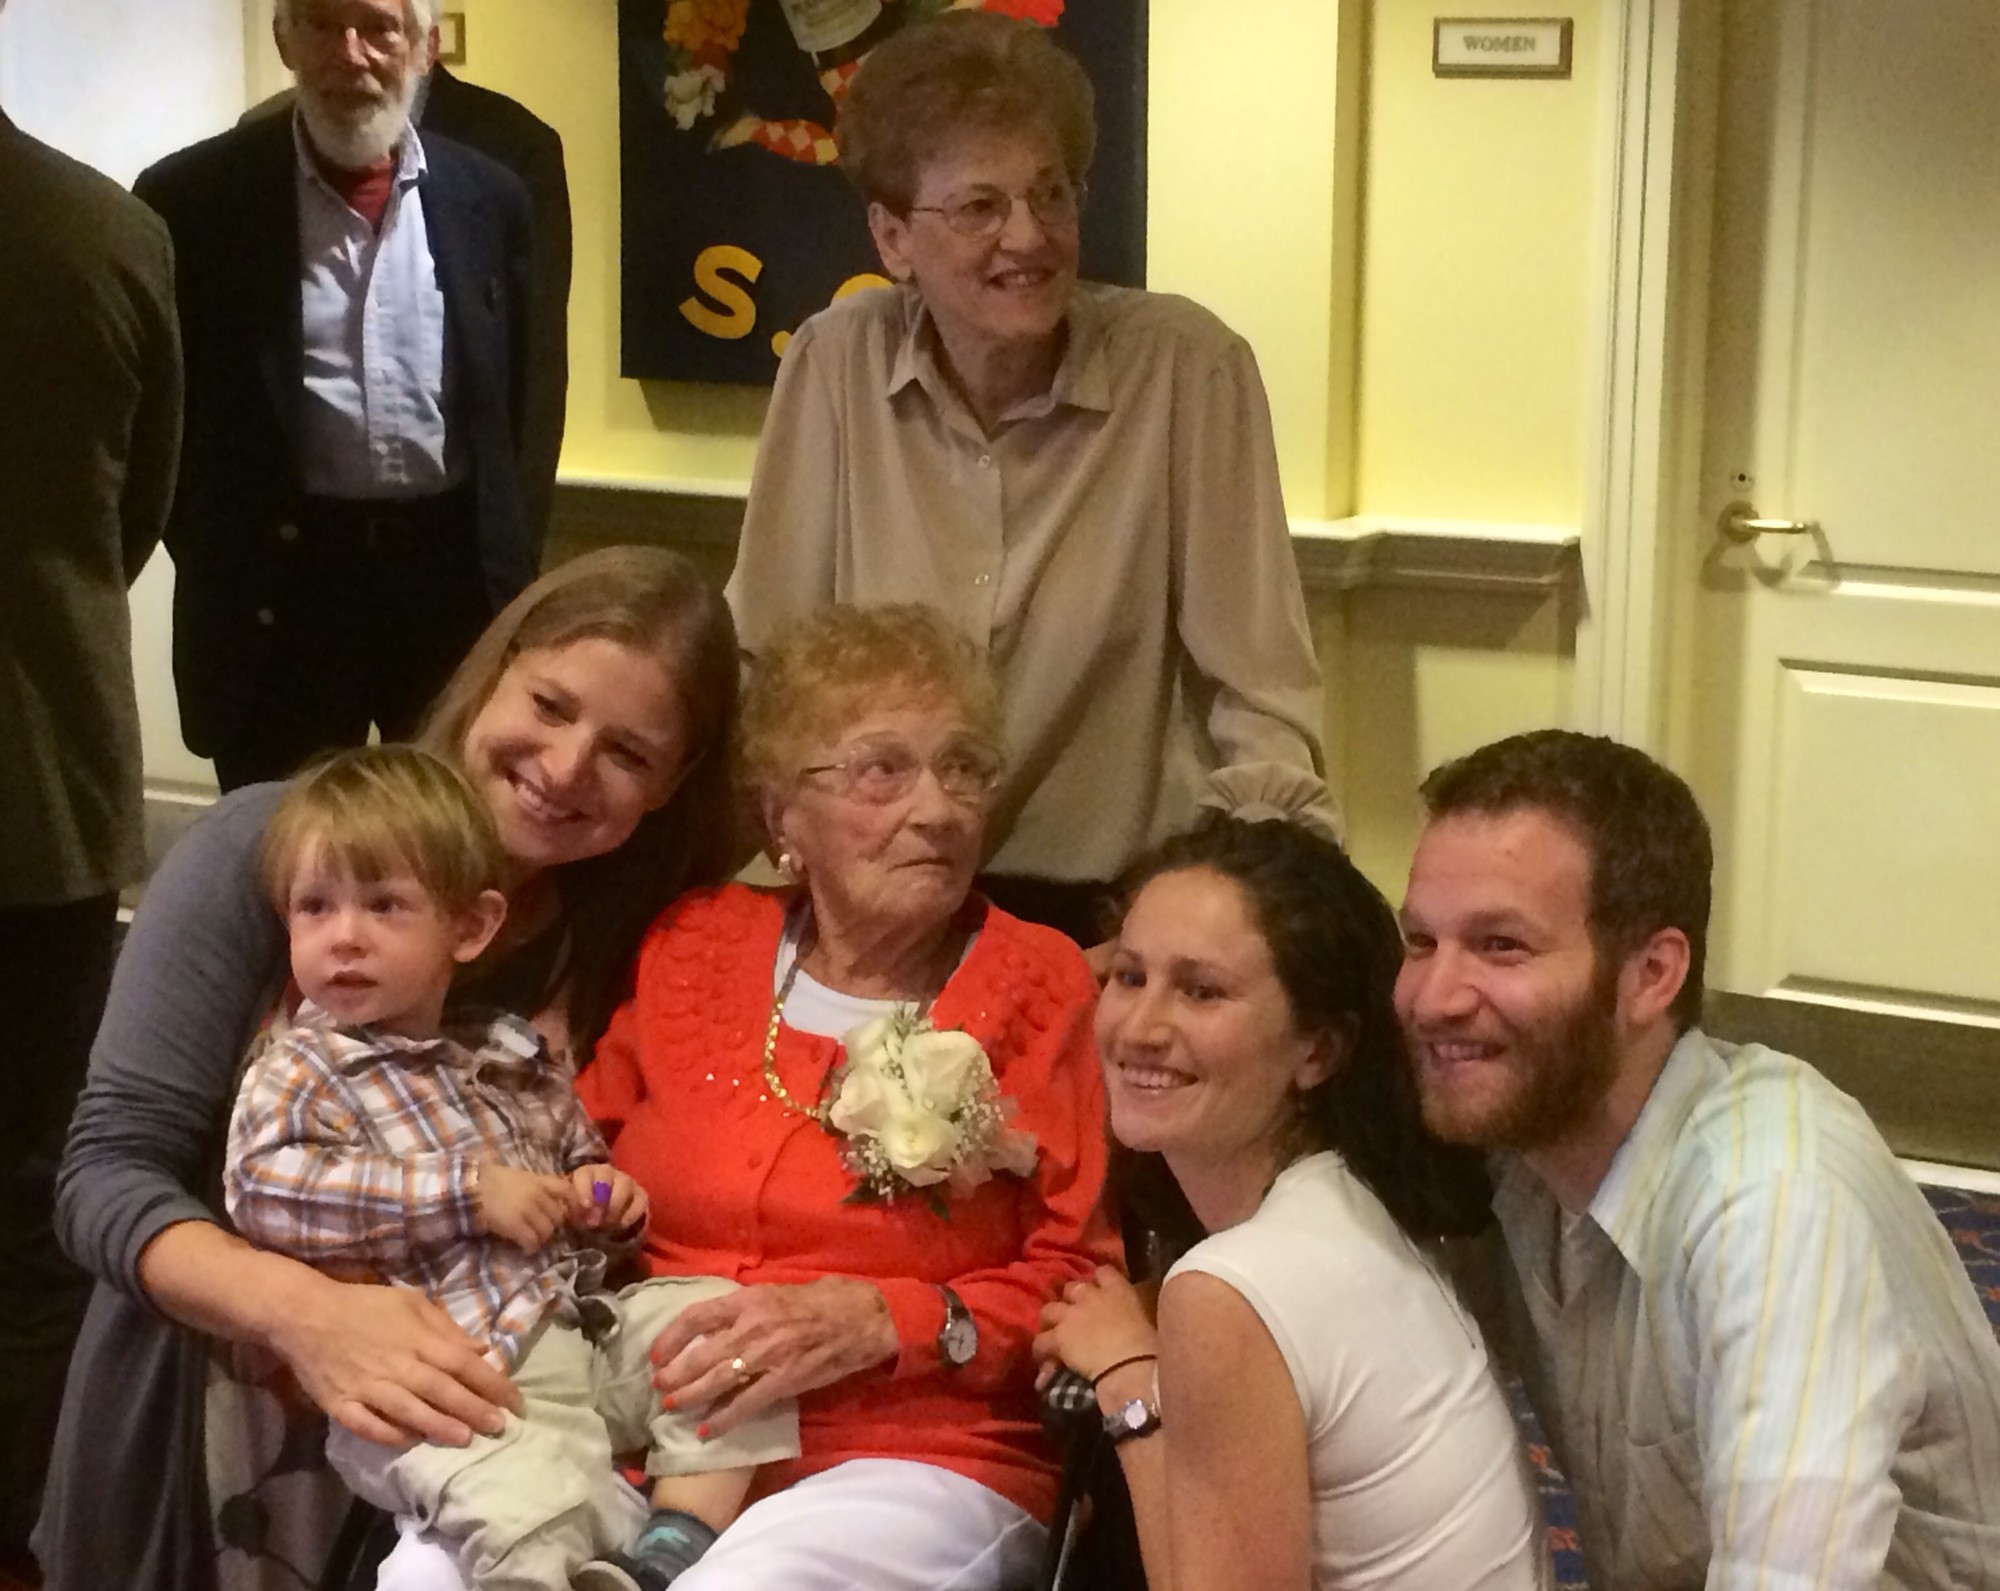 Shostak sits surrounded by her grandchildren, Susanna Post, far left, Sarah Shostak, near right, Adam Shostak, far right and her daughter, Lucy Shostak, back, and great grandson Ethan Post